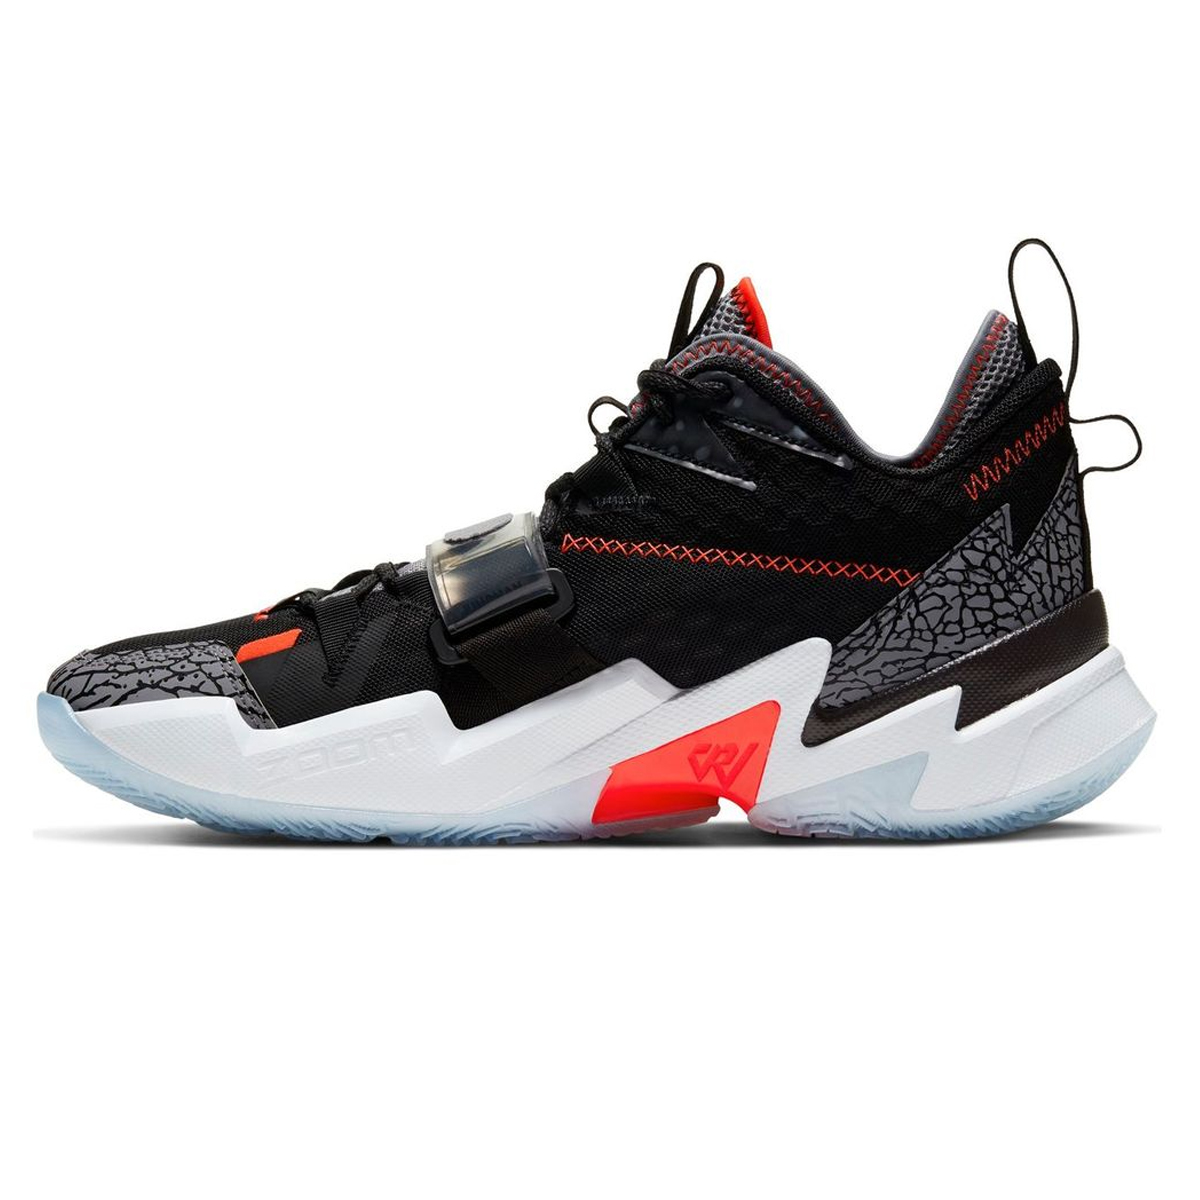 Zapatillas Jordan "Why Not?" Zer0.3,  image number null